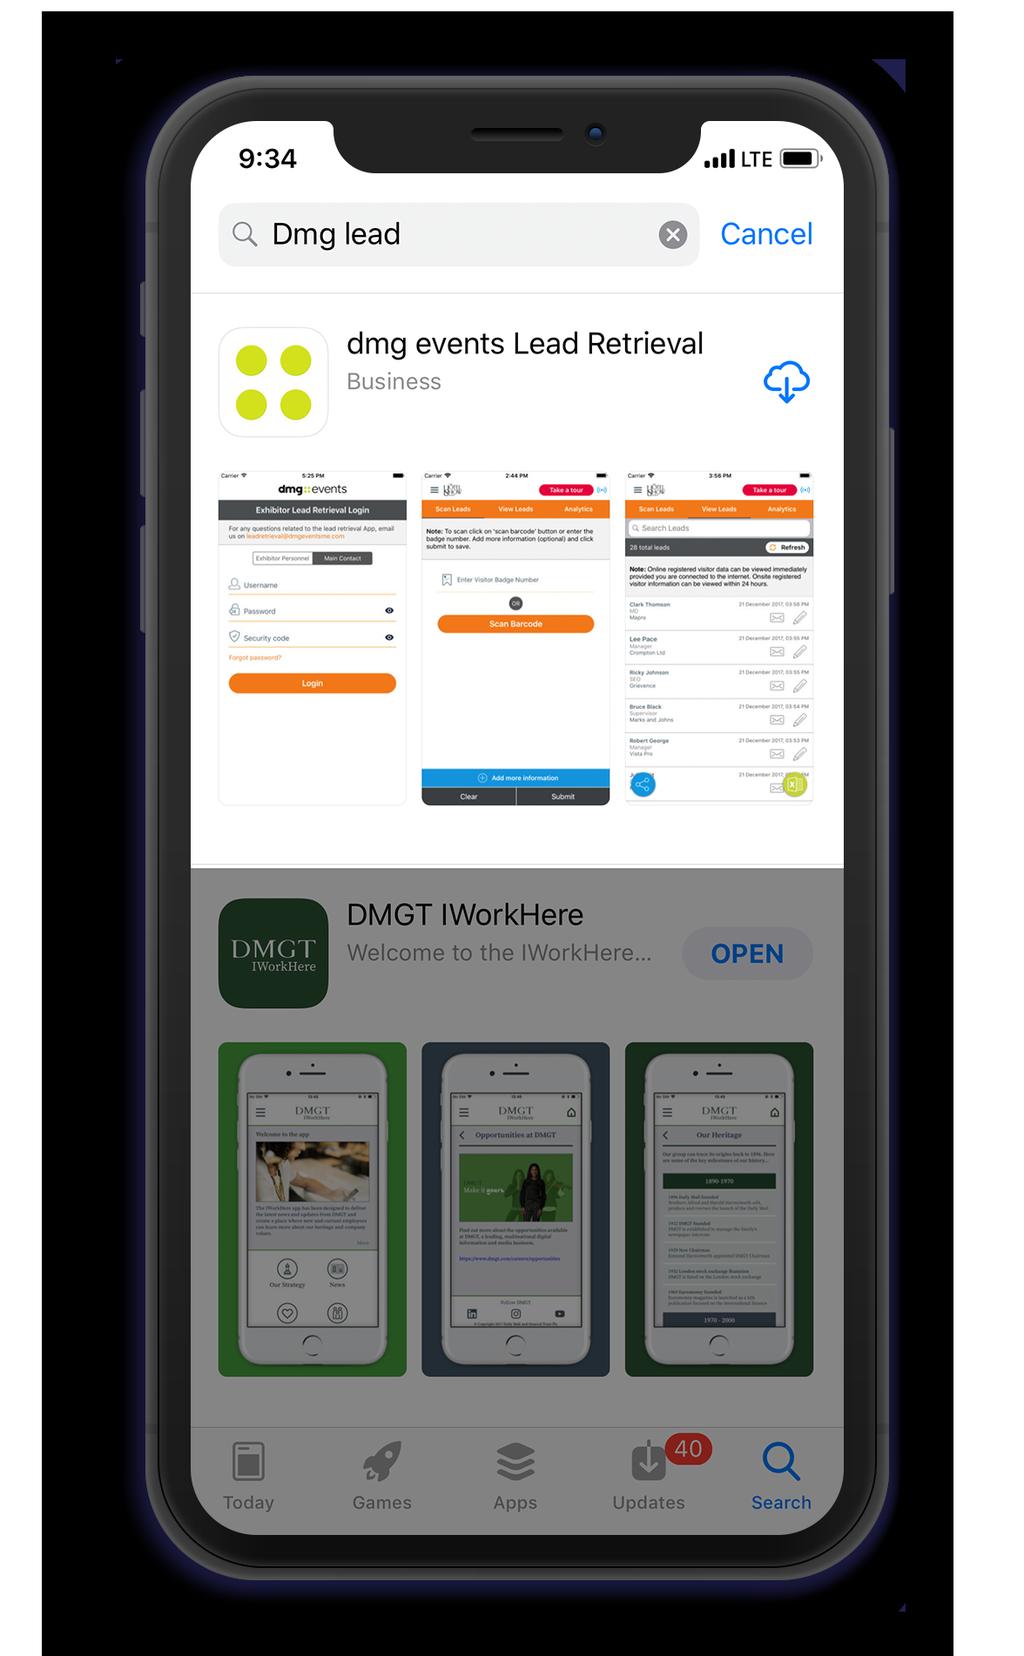 APP DOWNLOAD & INSTALL Go to the App Store and search for dmg events Lead Retrieval Click